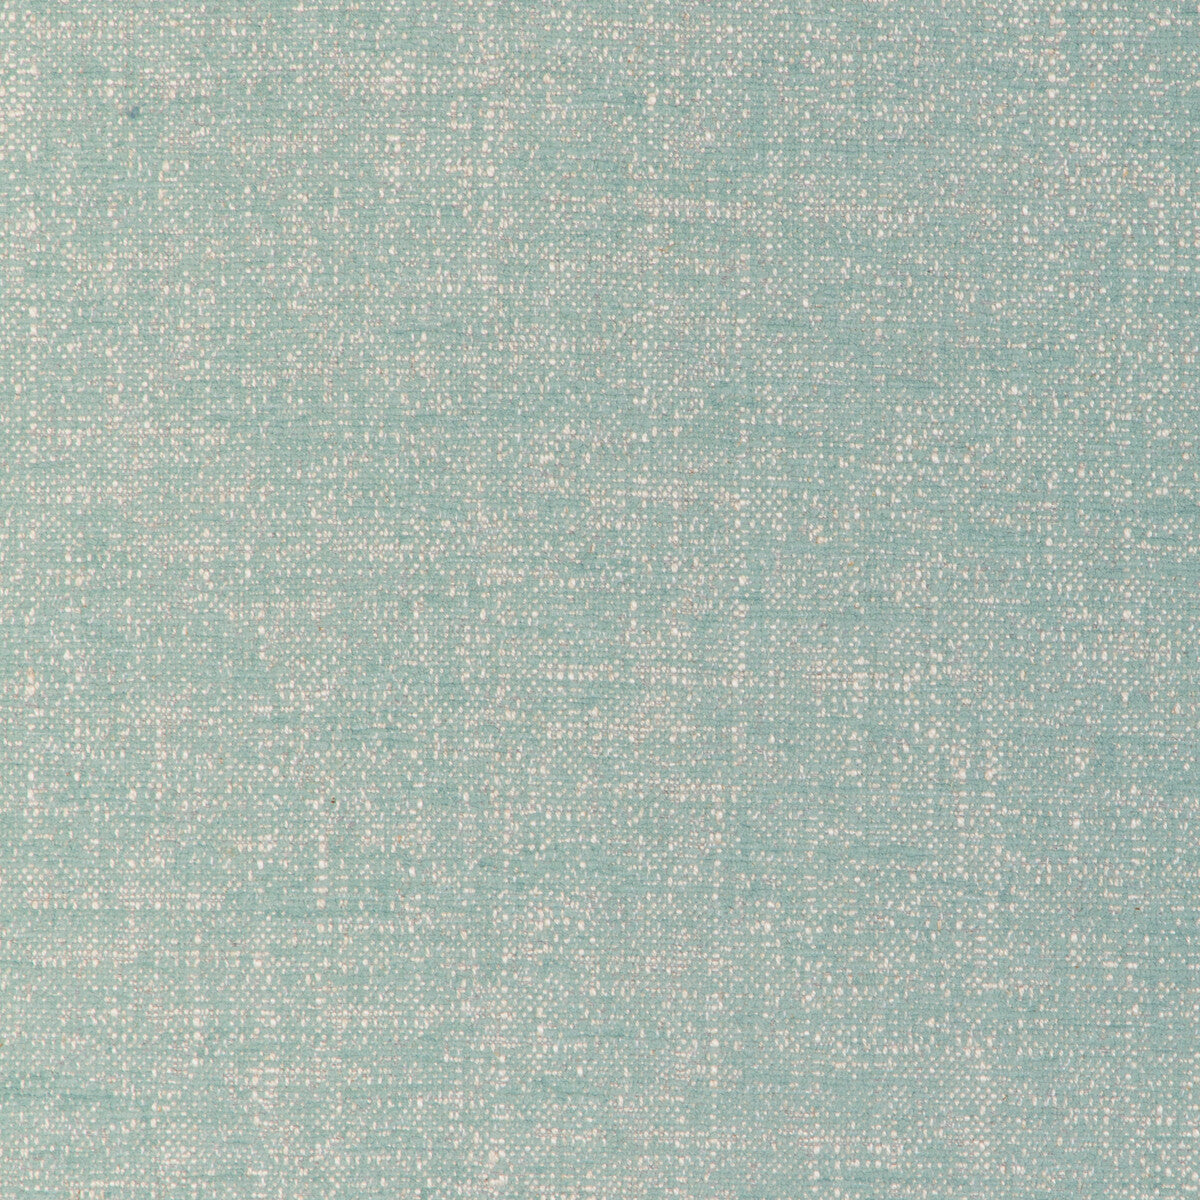 Kravet Design fabric in 36951-13 color - pattern 36951.13.0 - by Kravet Design in the Sustainable Textures II collection